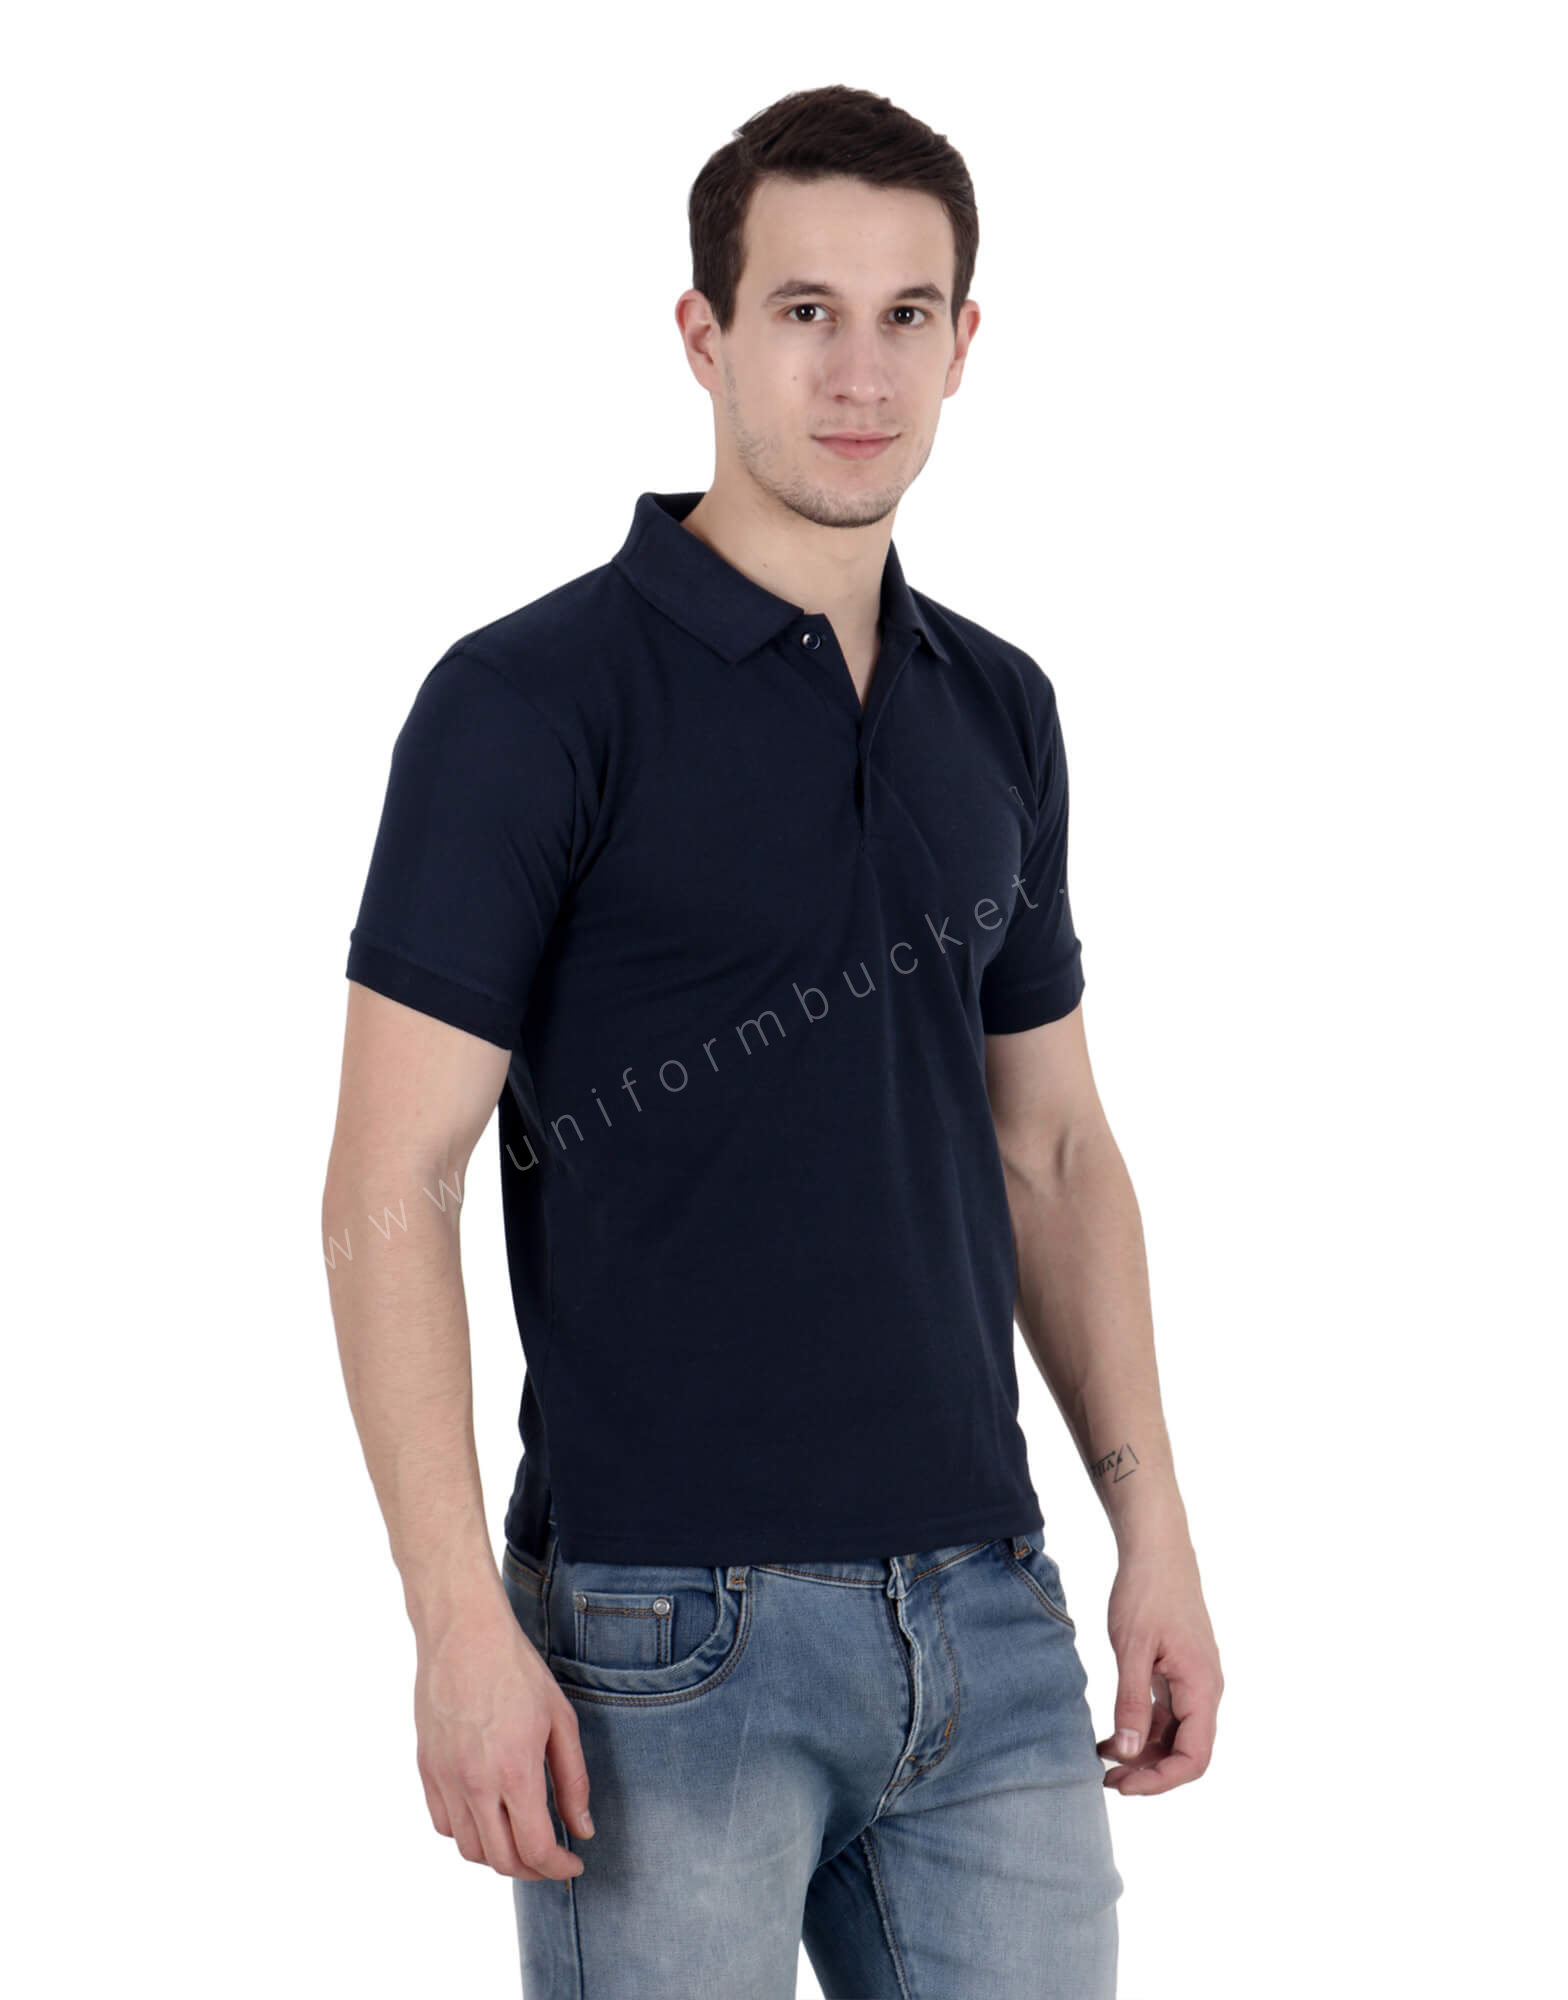 Buy Navy Blue Uniform Polo T-Shirt For Men Online @ Best Prices in ...